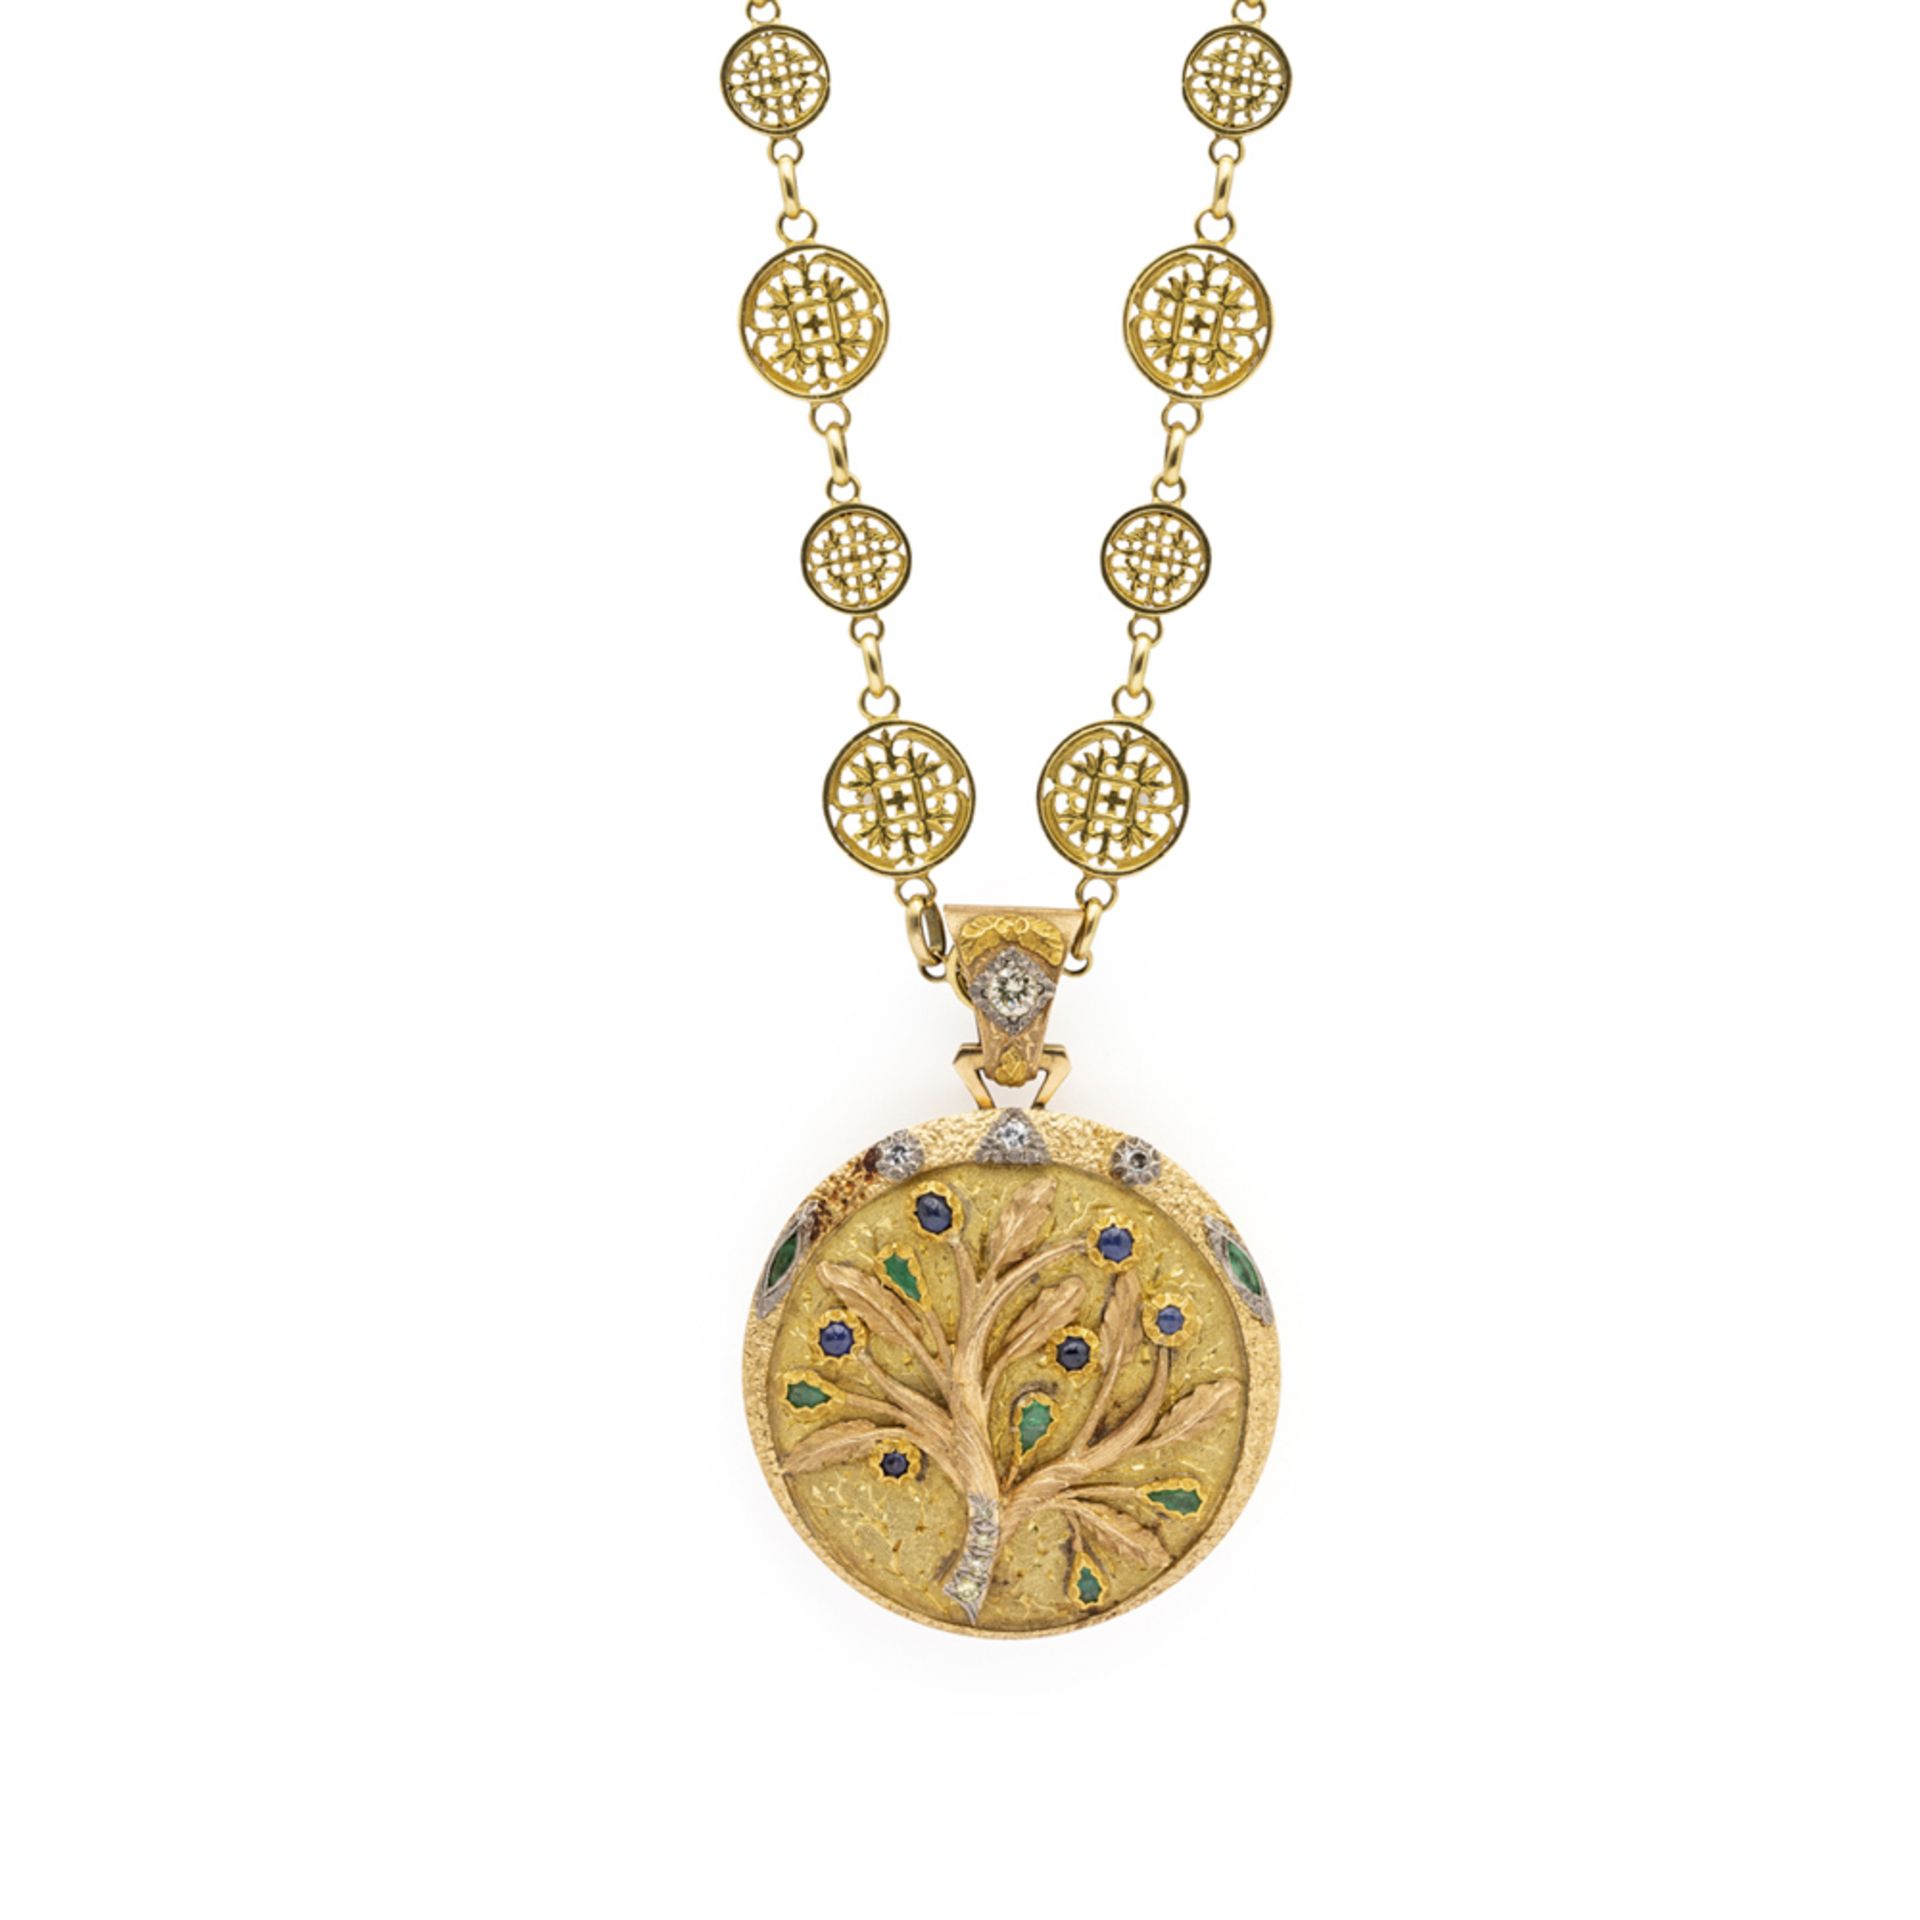 Filippo Moroni, long necklace with Tree of Life pendant